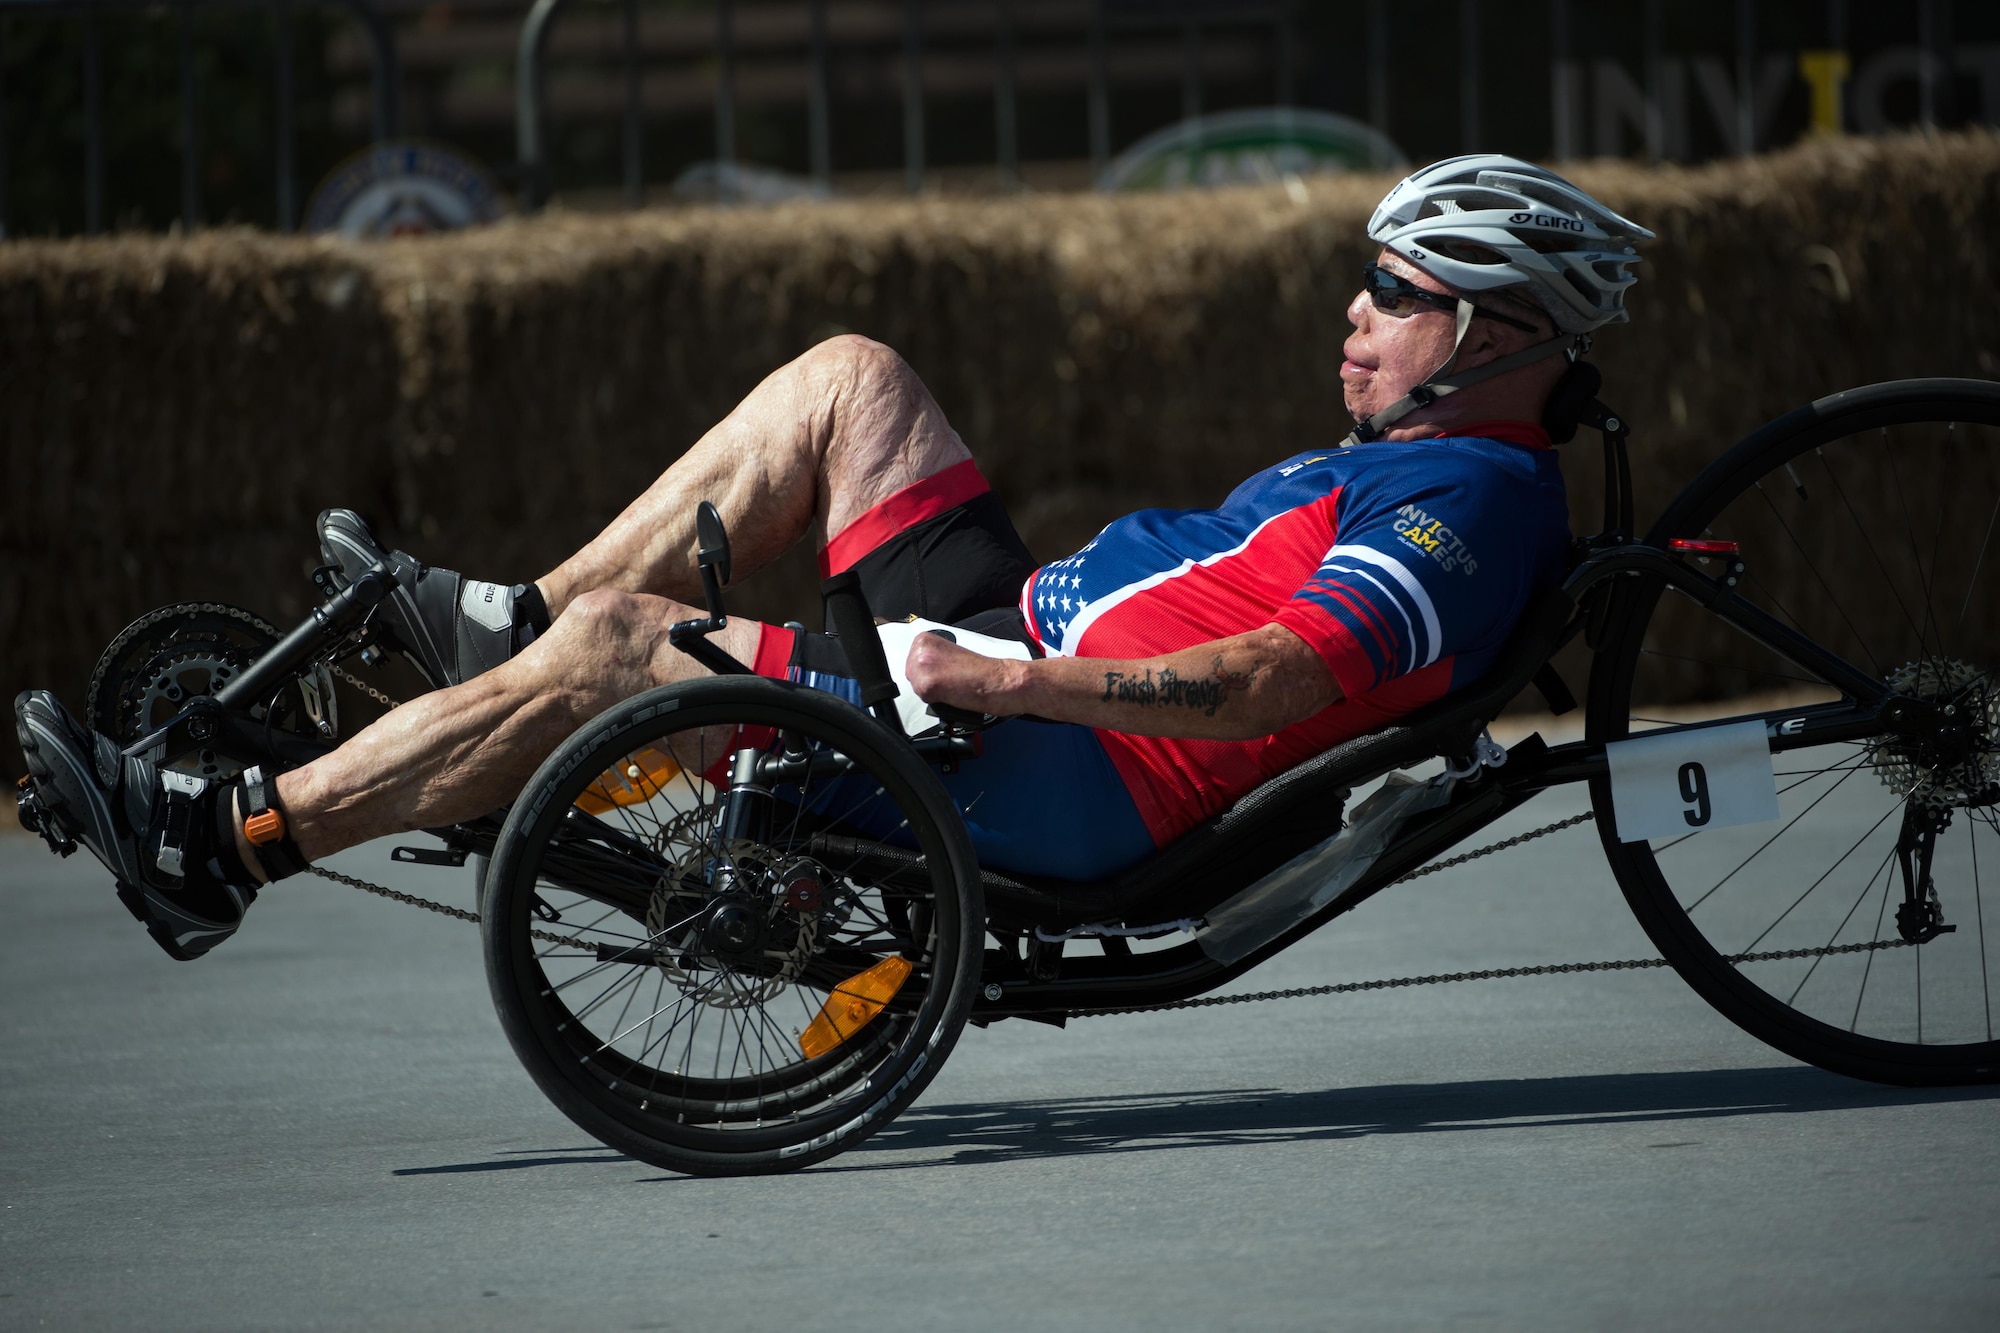 Master Sgt. Israel Del Toro Piper races a recumbent bike during the 2016 Invictus Games in Orlando, Fla., May 10, 2016. (DOD photo/EJ Hersom)